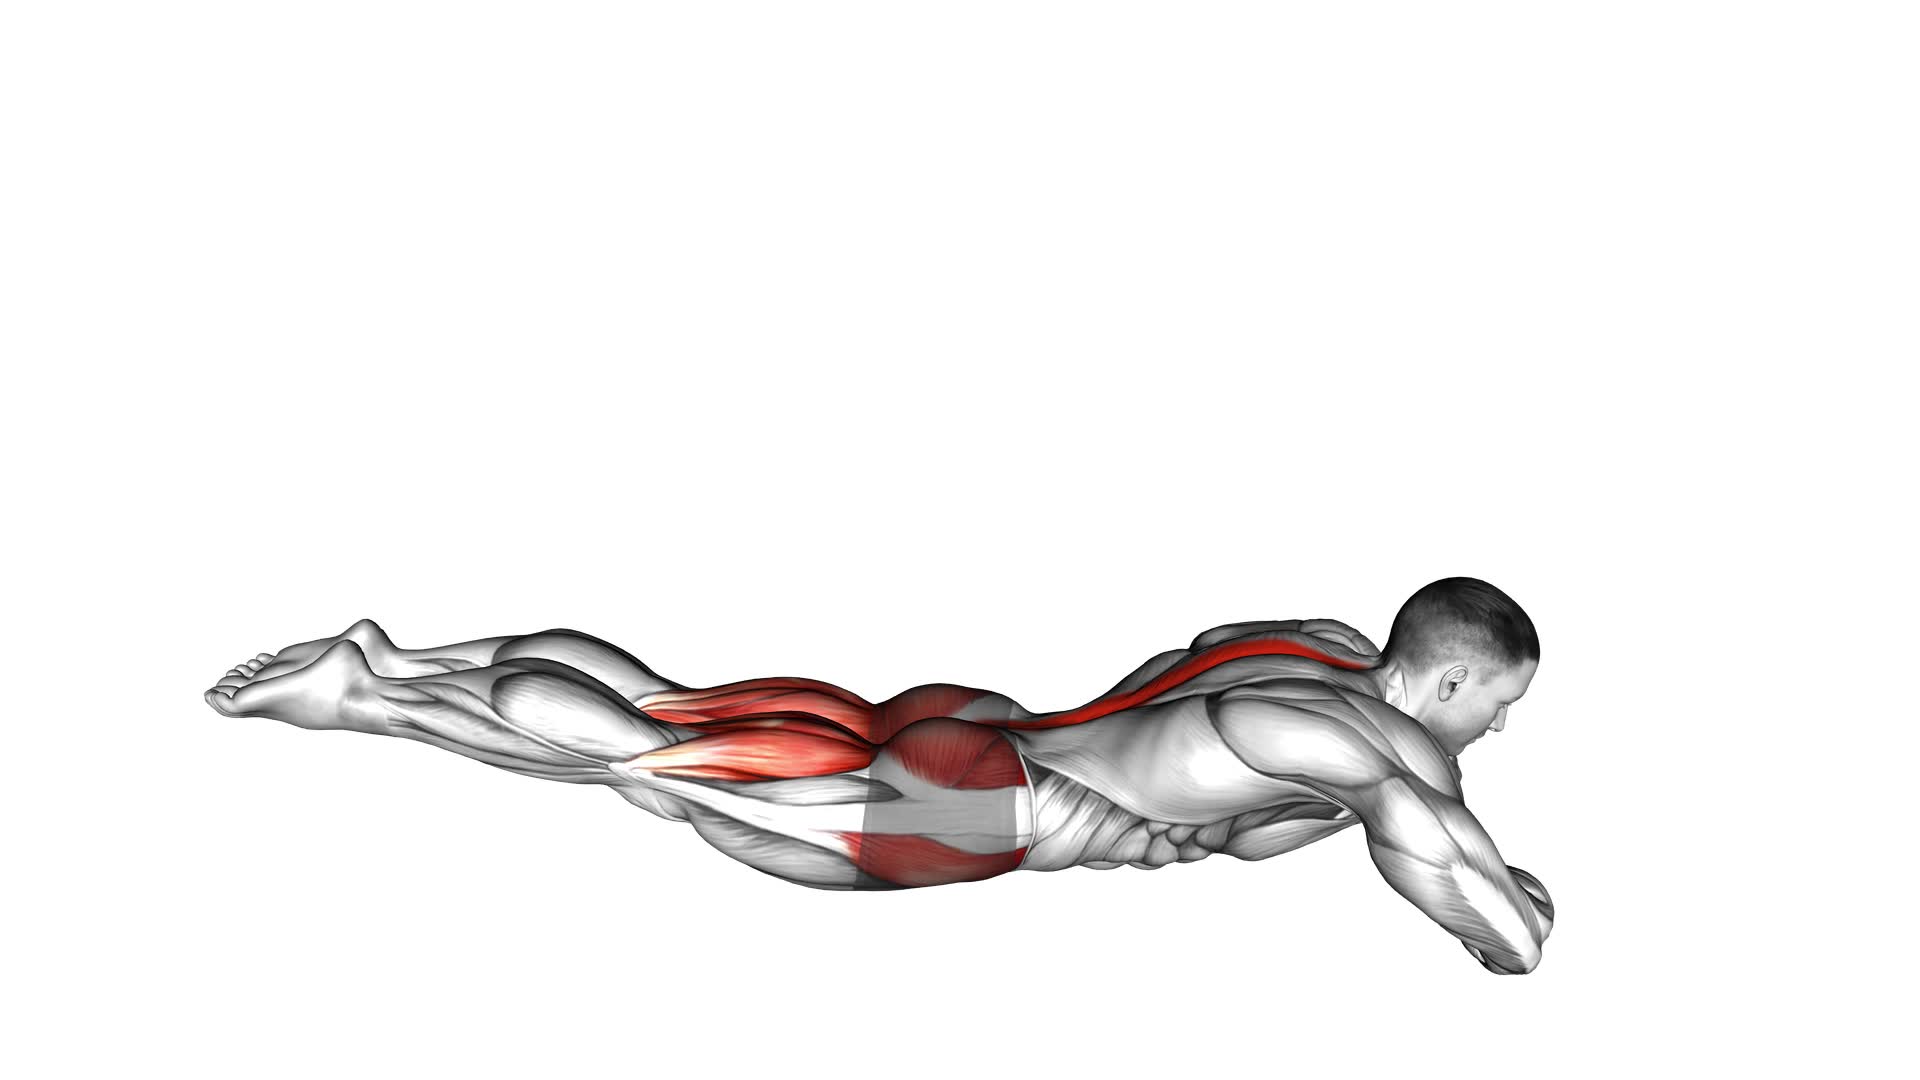 Frog Reverse Hyperextension Tap on Floor (male) - Video Exercise Guide & Tips